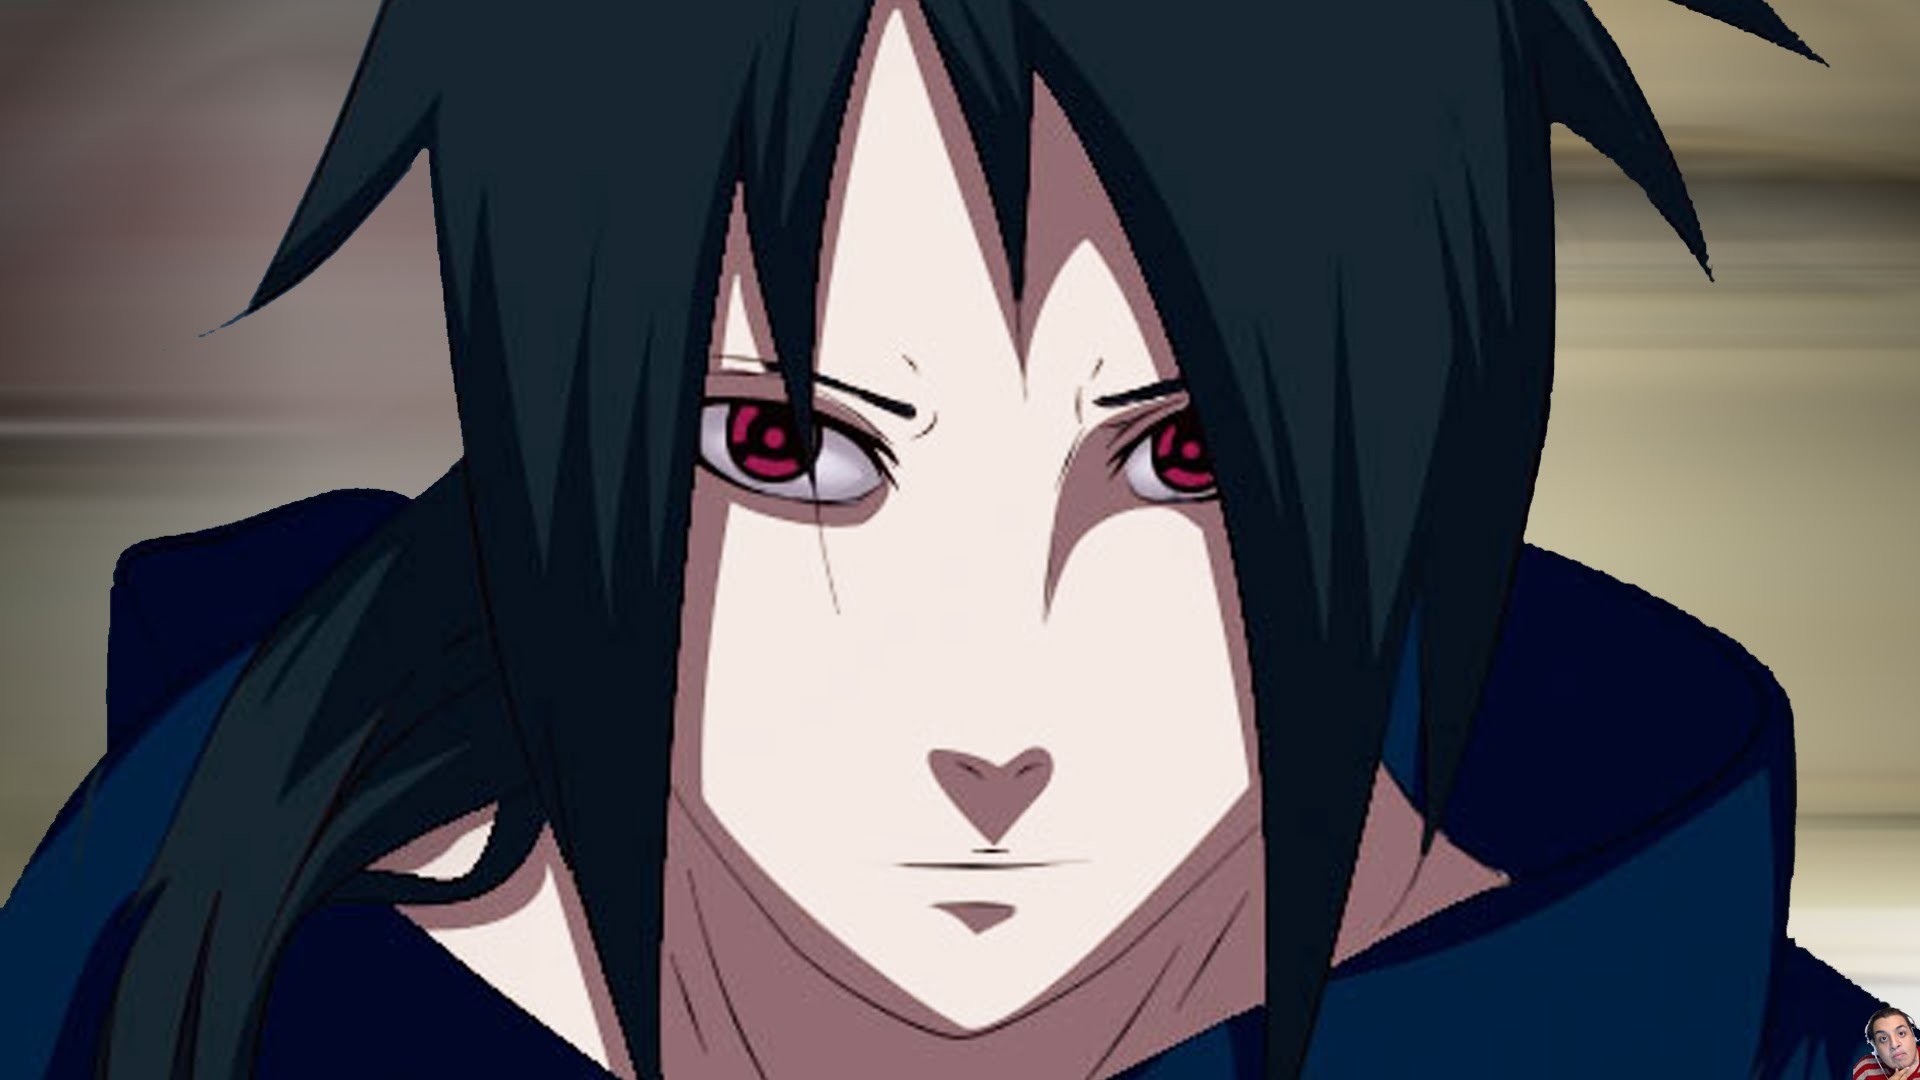 1920x1080 Re: Who is the best looking uchiha